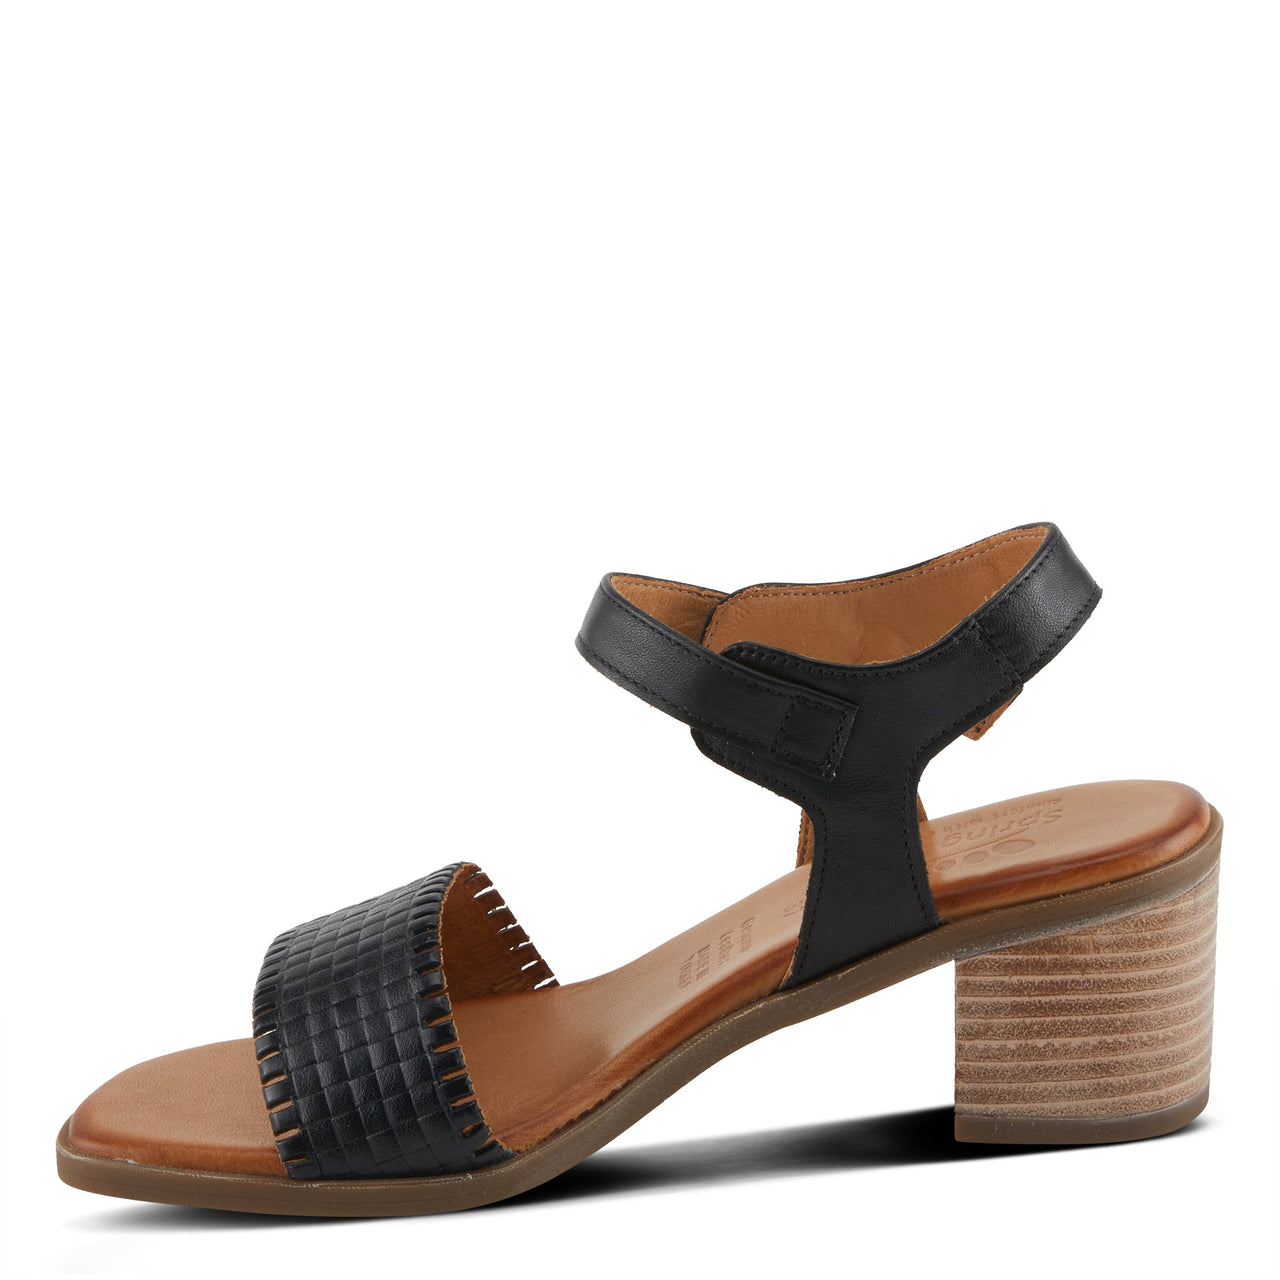 Black leather Spring Step Nifona sandals with crisscross straps and adjustable buckle